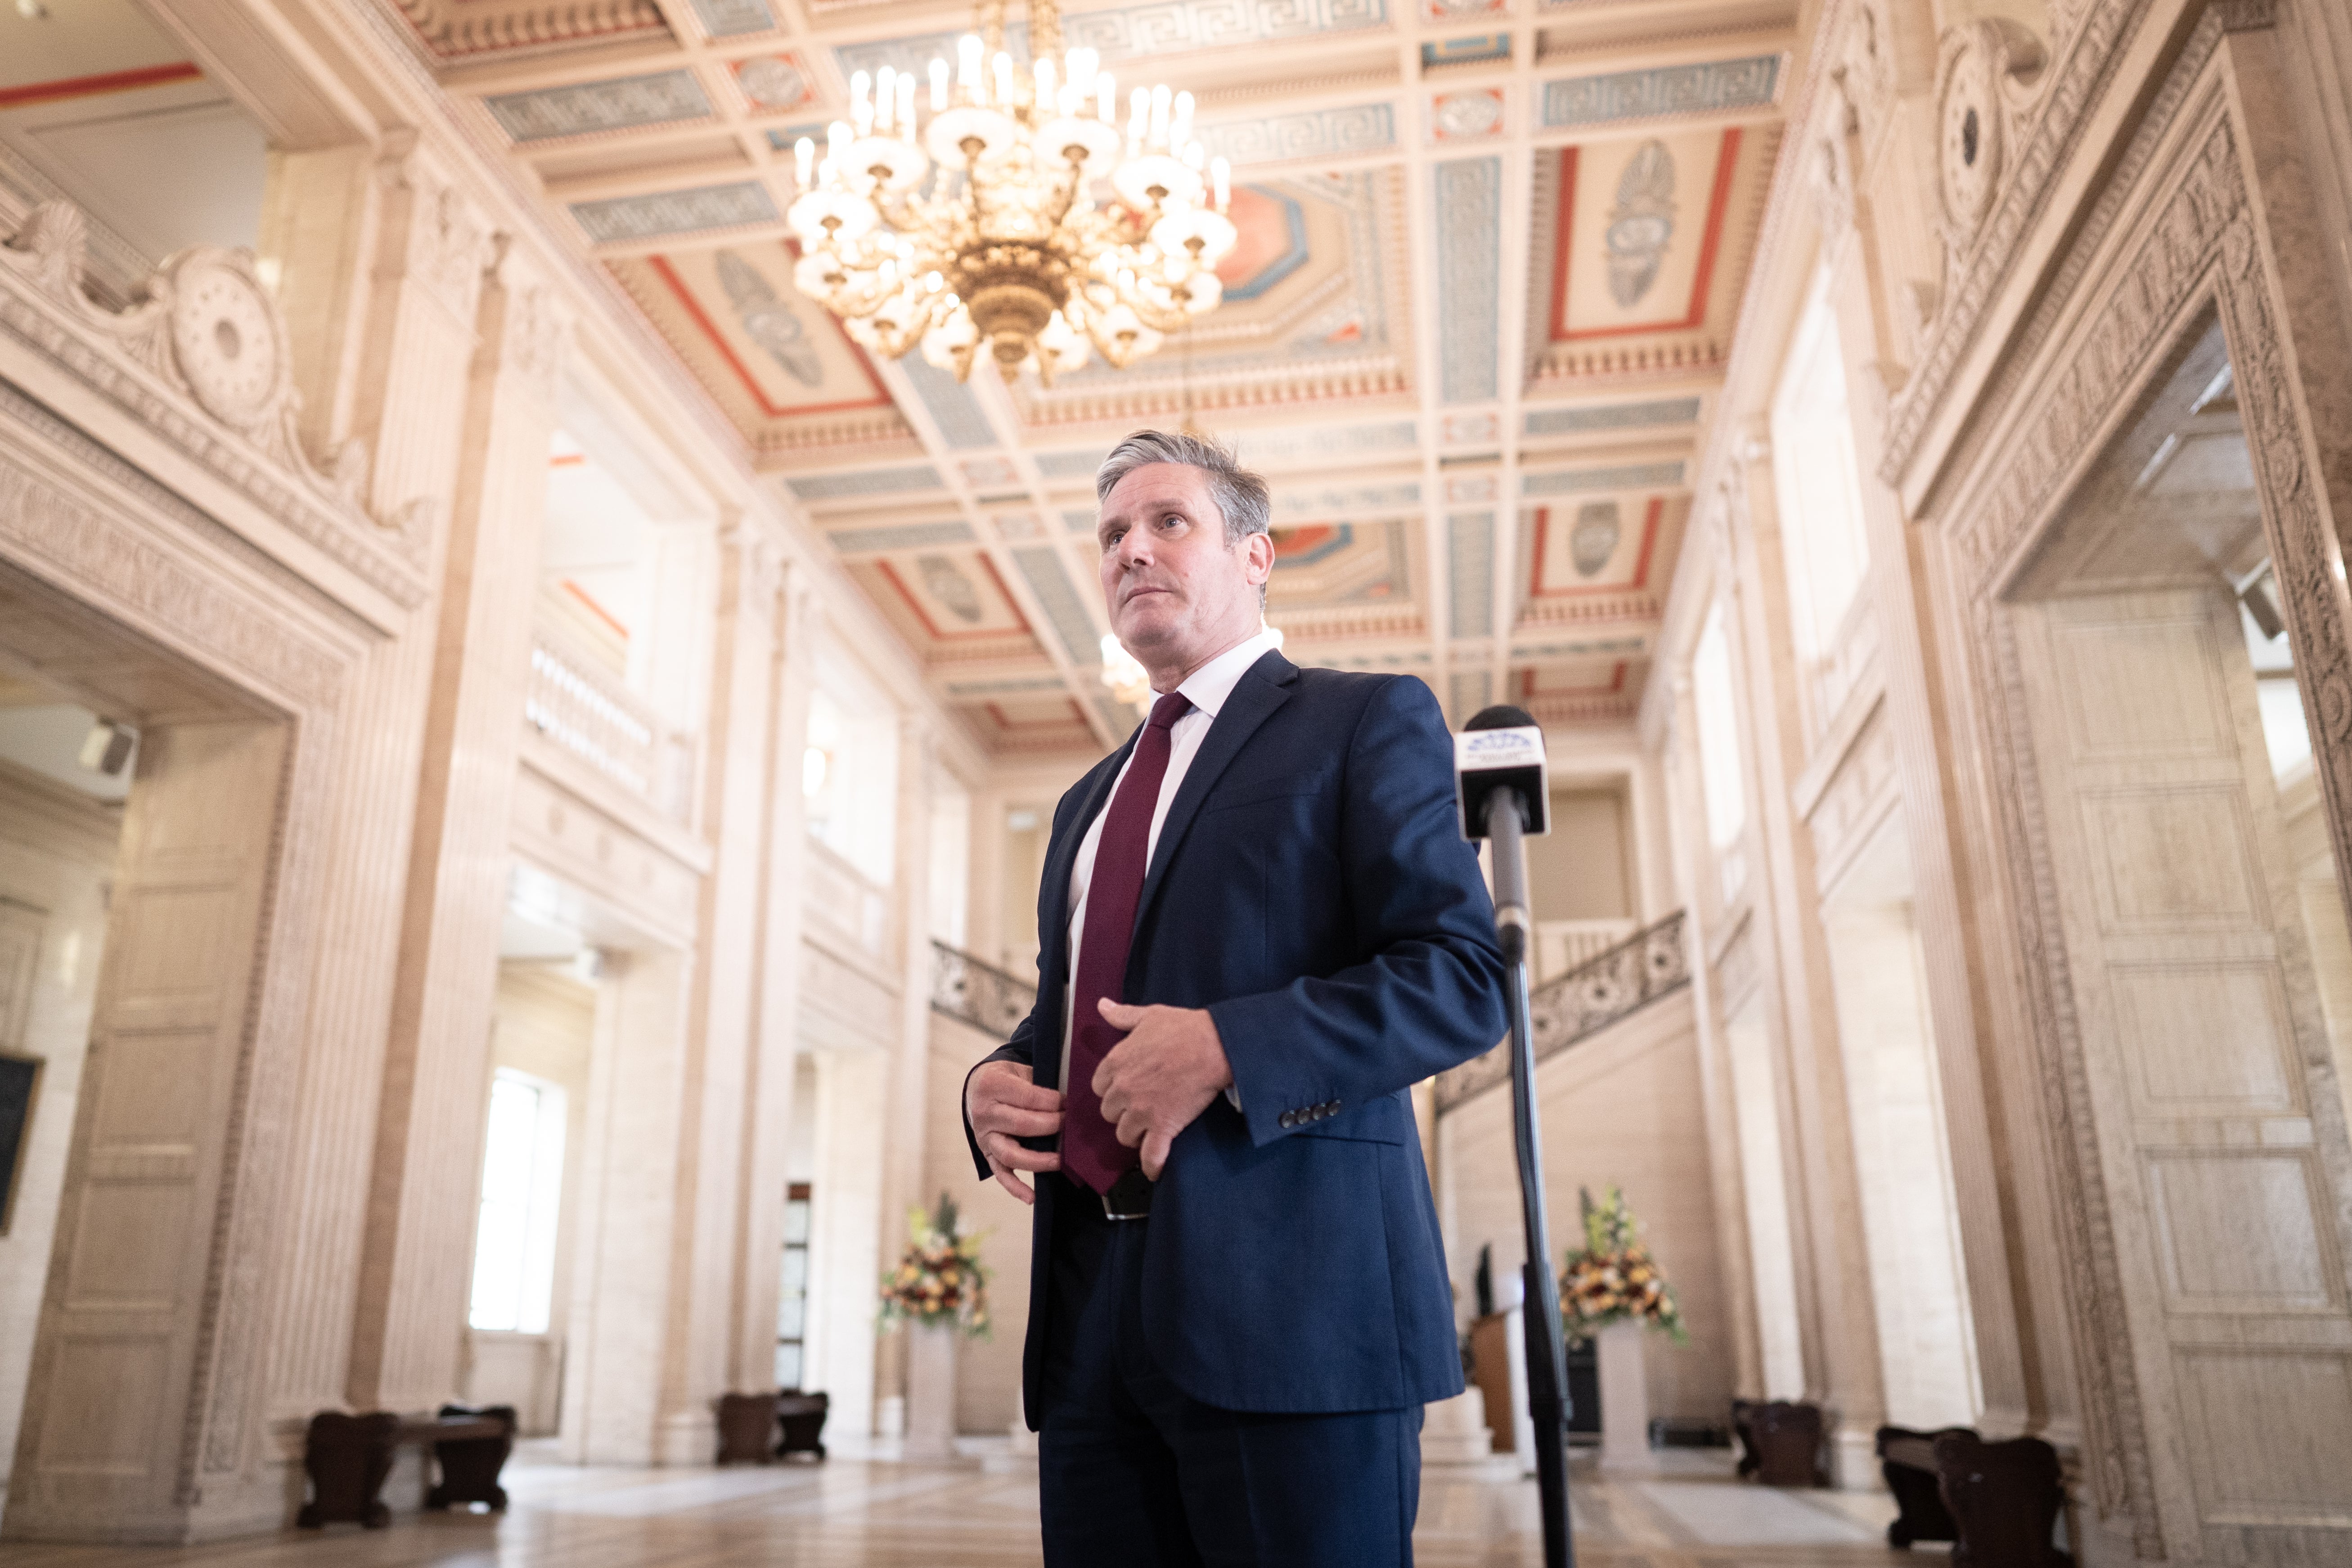 Labour leader Sir Keir Starmer speaks to the media at the Stormont Parliament Buildings in Belfast where he is holding meetings with leaders of political parties during the final day of his three day visit to Dublin and Belfast. Picture date: Friday June 10, 2022.